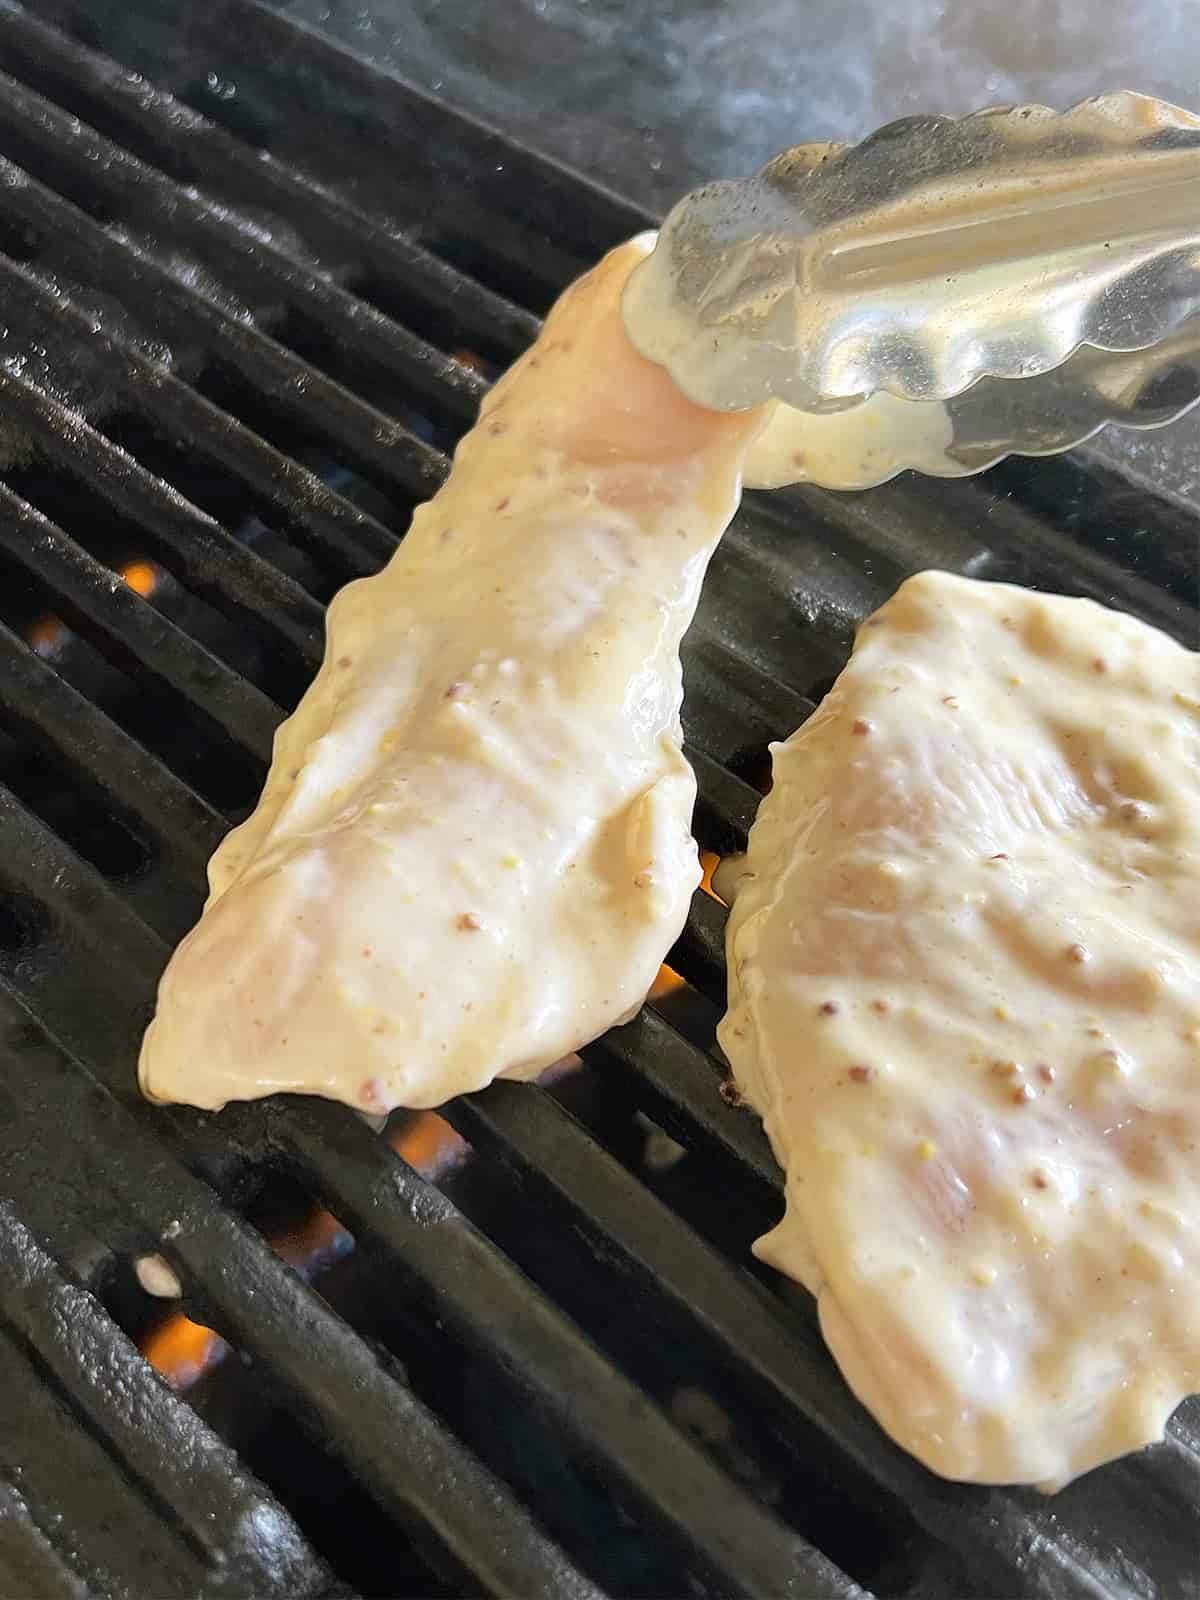 Placing mayonnaise marinated chicken on the barbecue with tongs.